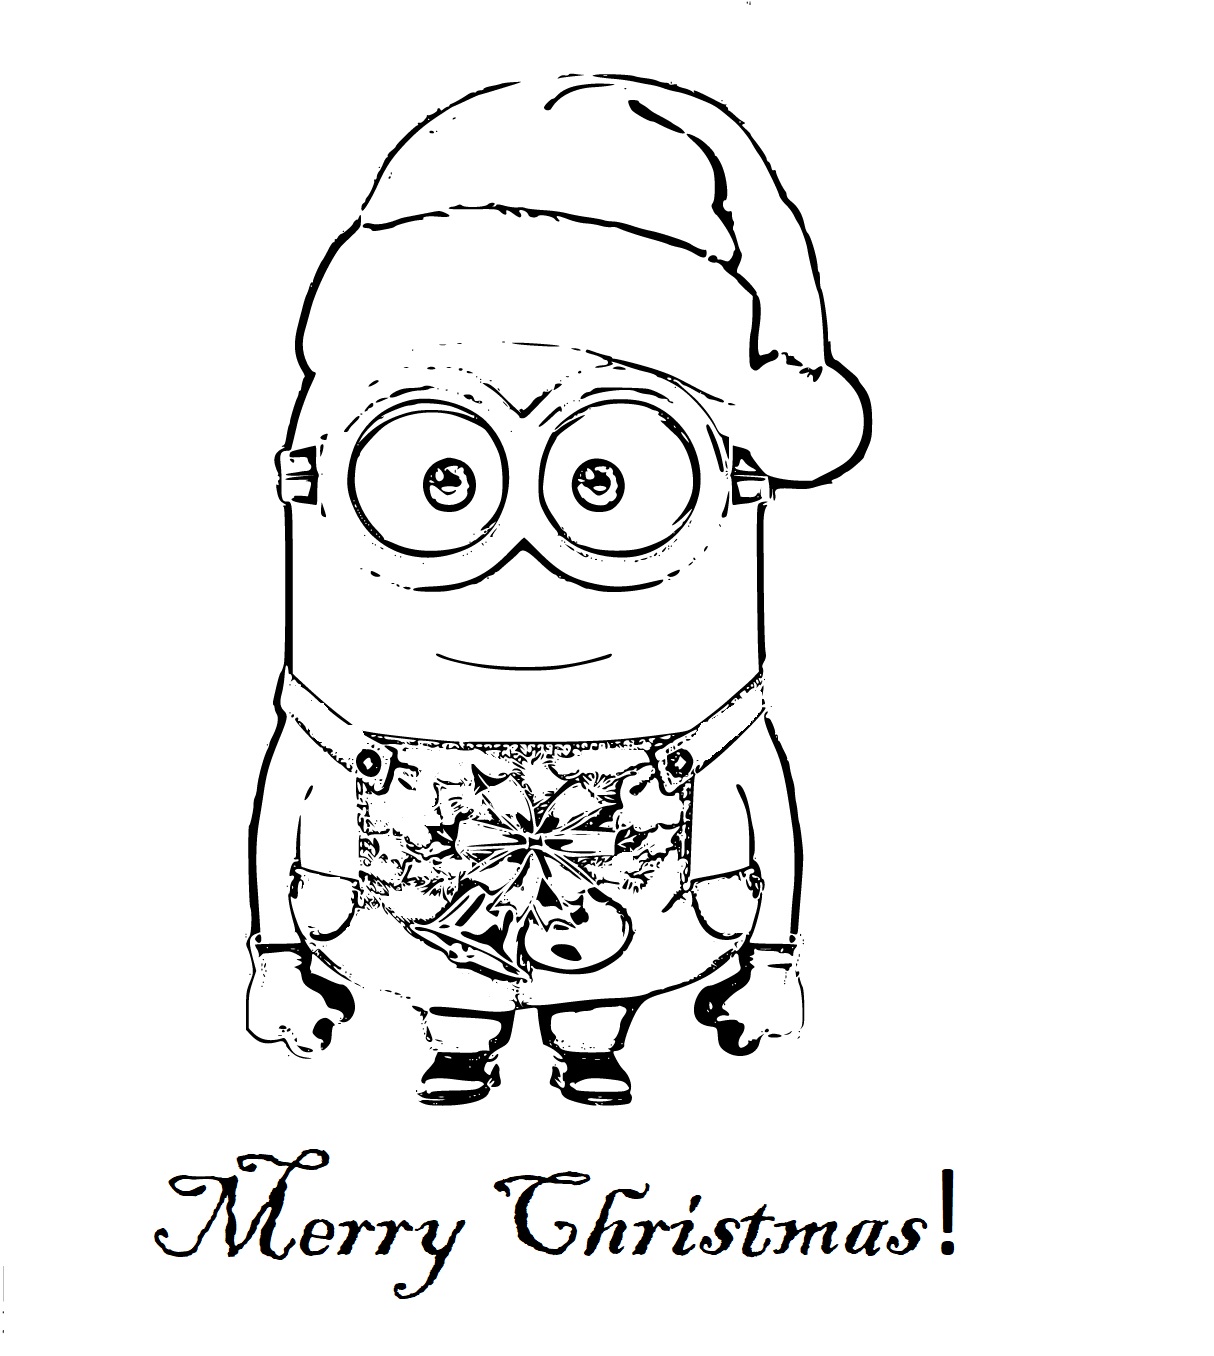 Printable Minion: Merry Christmas! Coloring Page for kids.